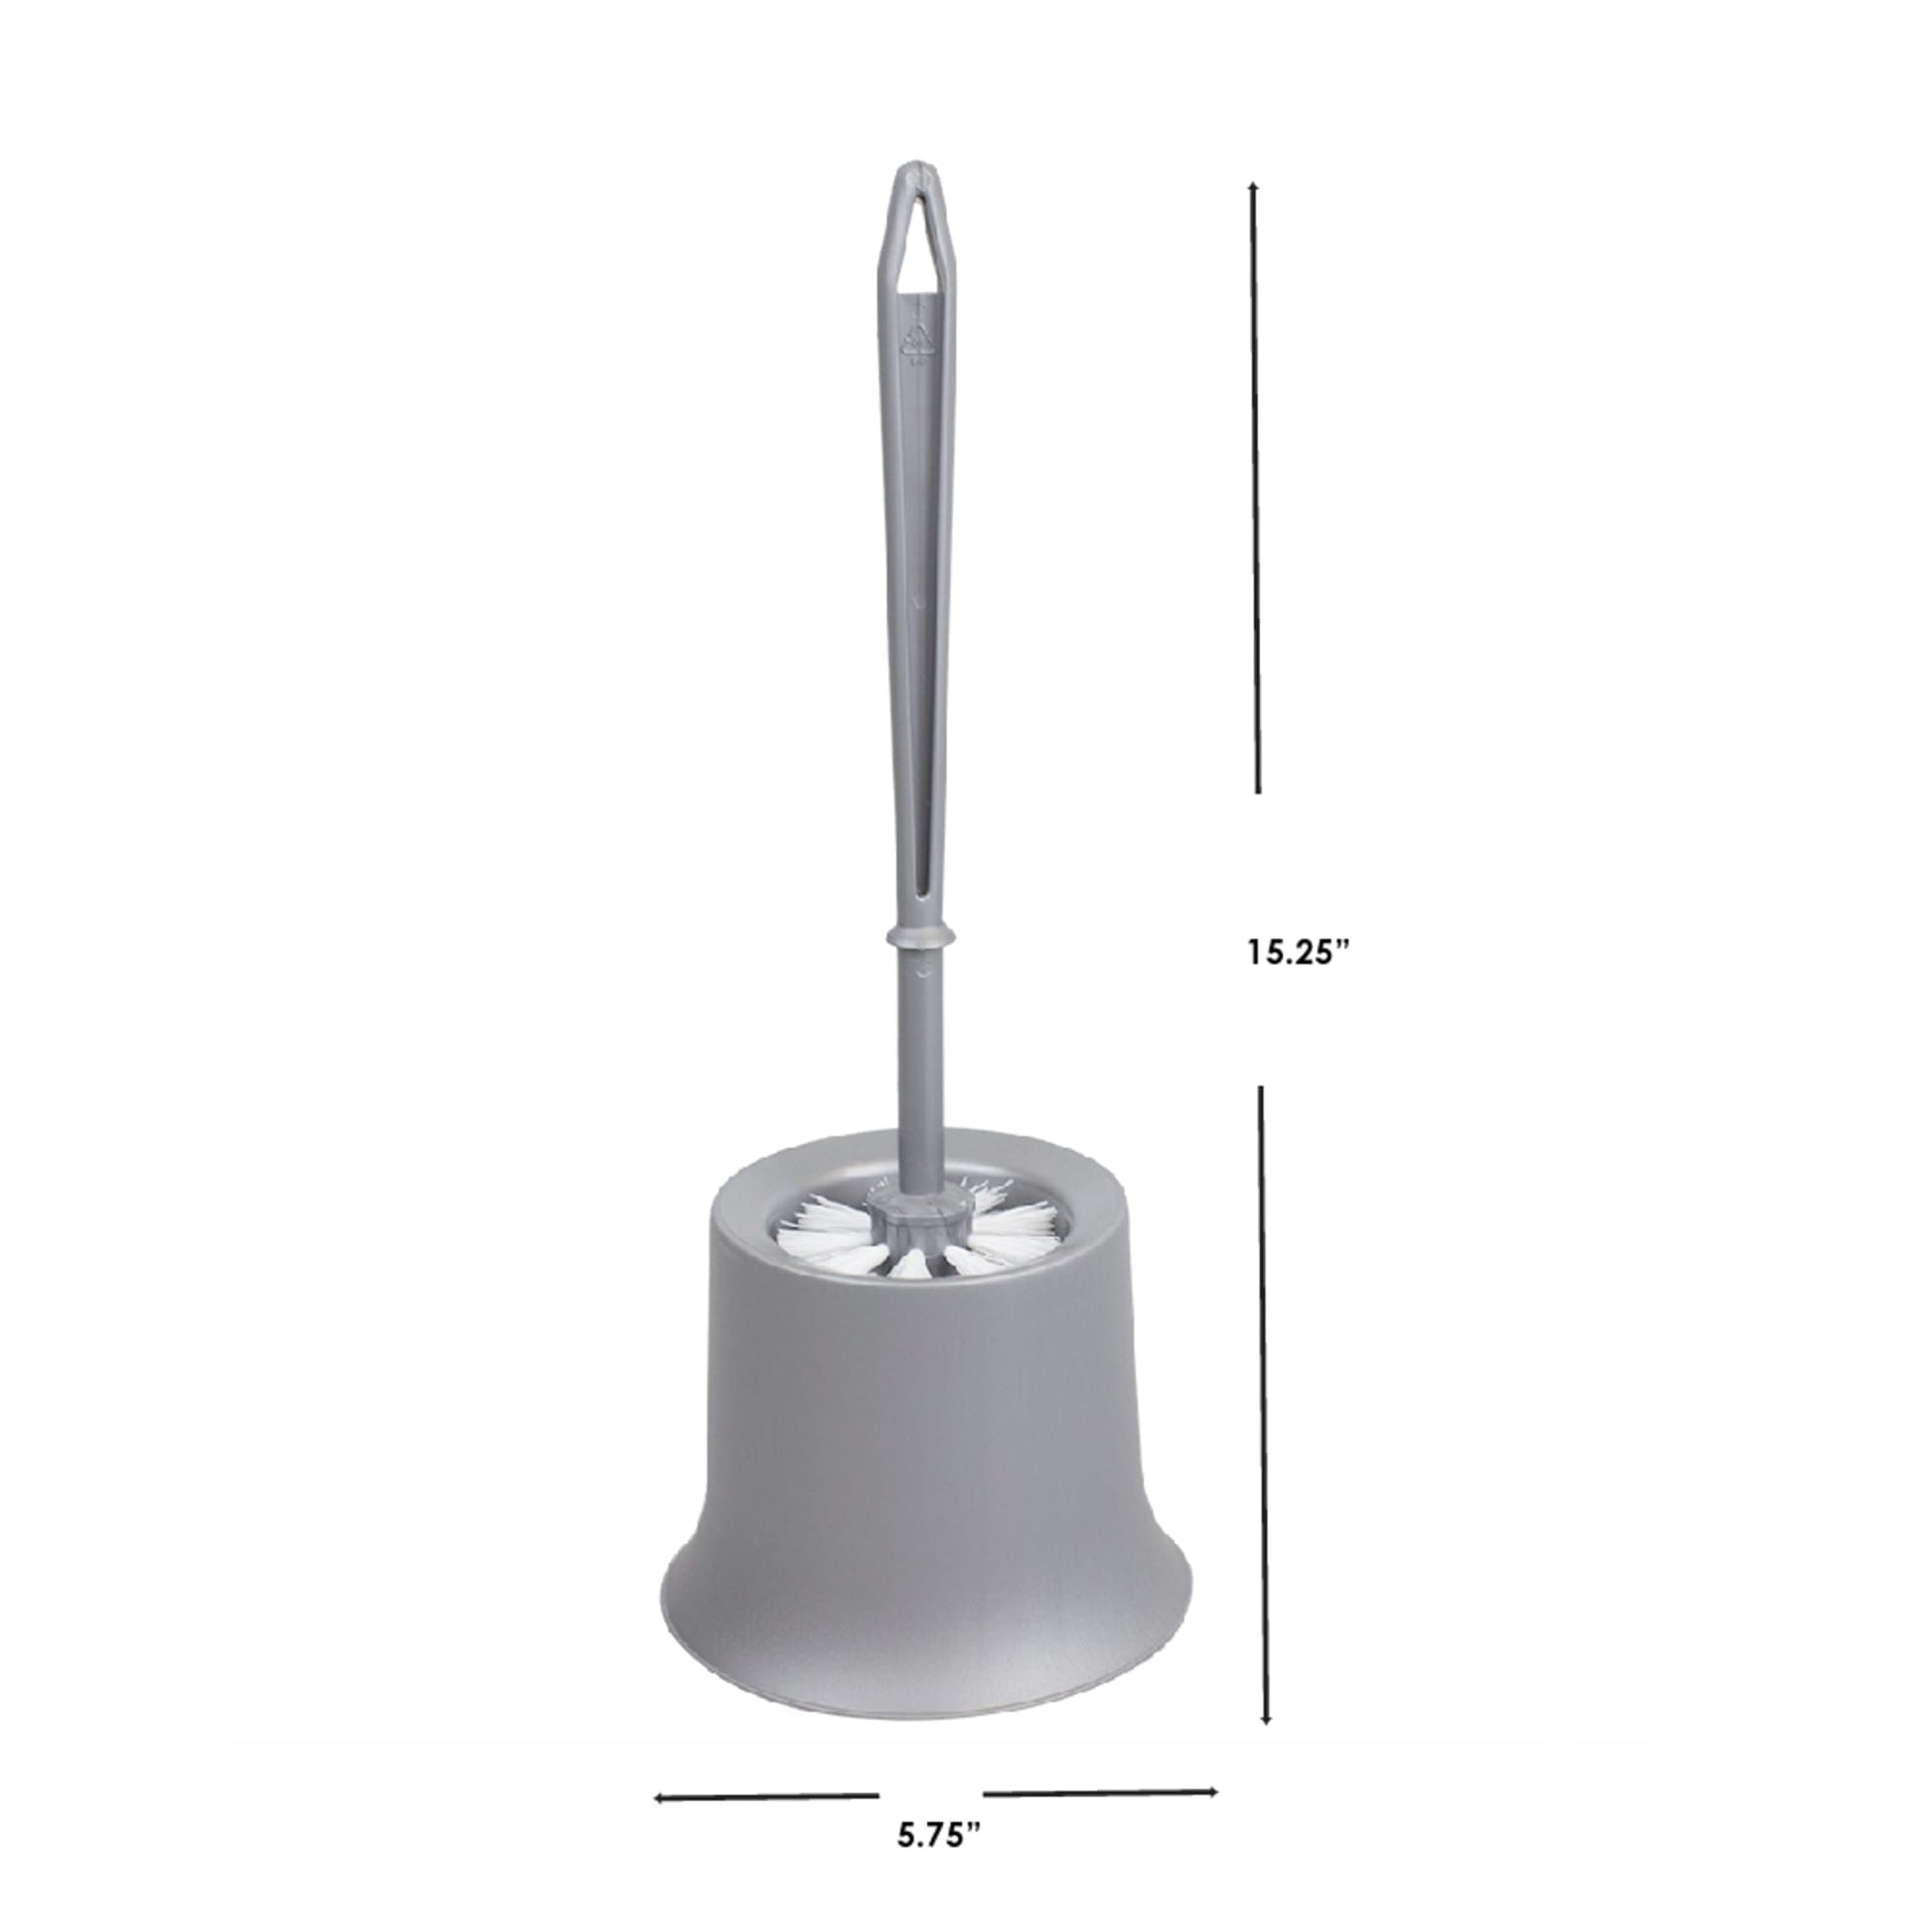 Toilet Brush and Holder, Compact Size Toilet Bowl Brush with Stainless  Steel Handle, Small Size Plastic Holder Easy to Hide, Space Saving for  Storage